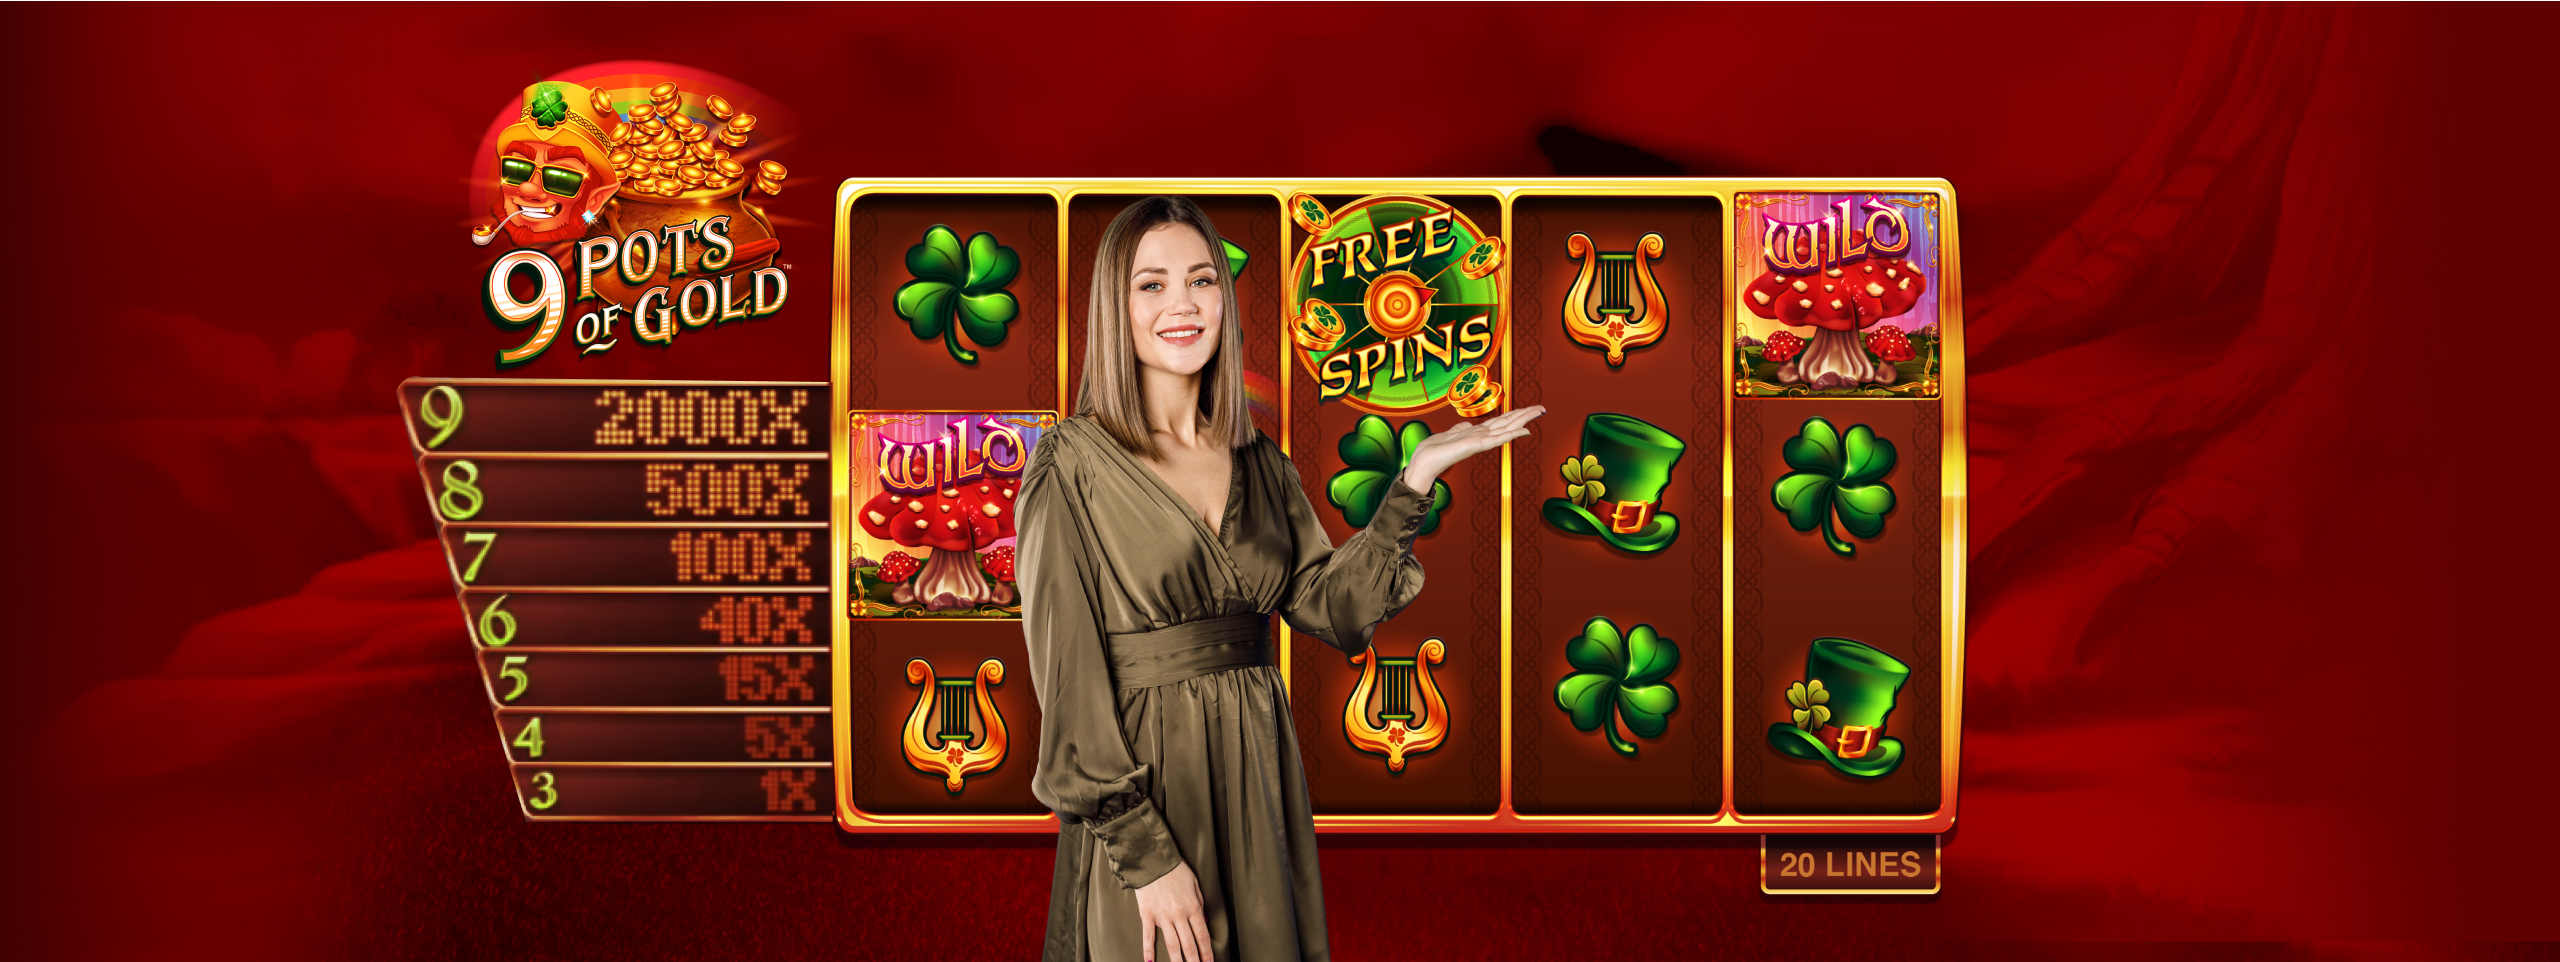 Game presenter in front of 9 Pots of Gold Slots.